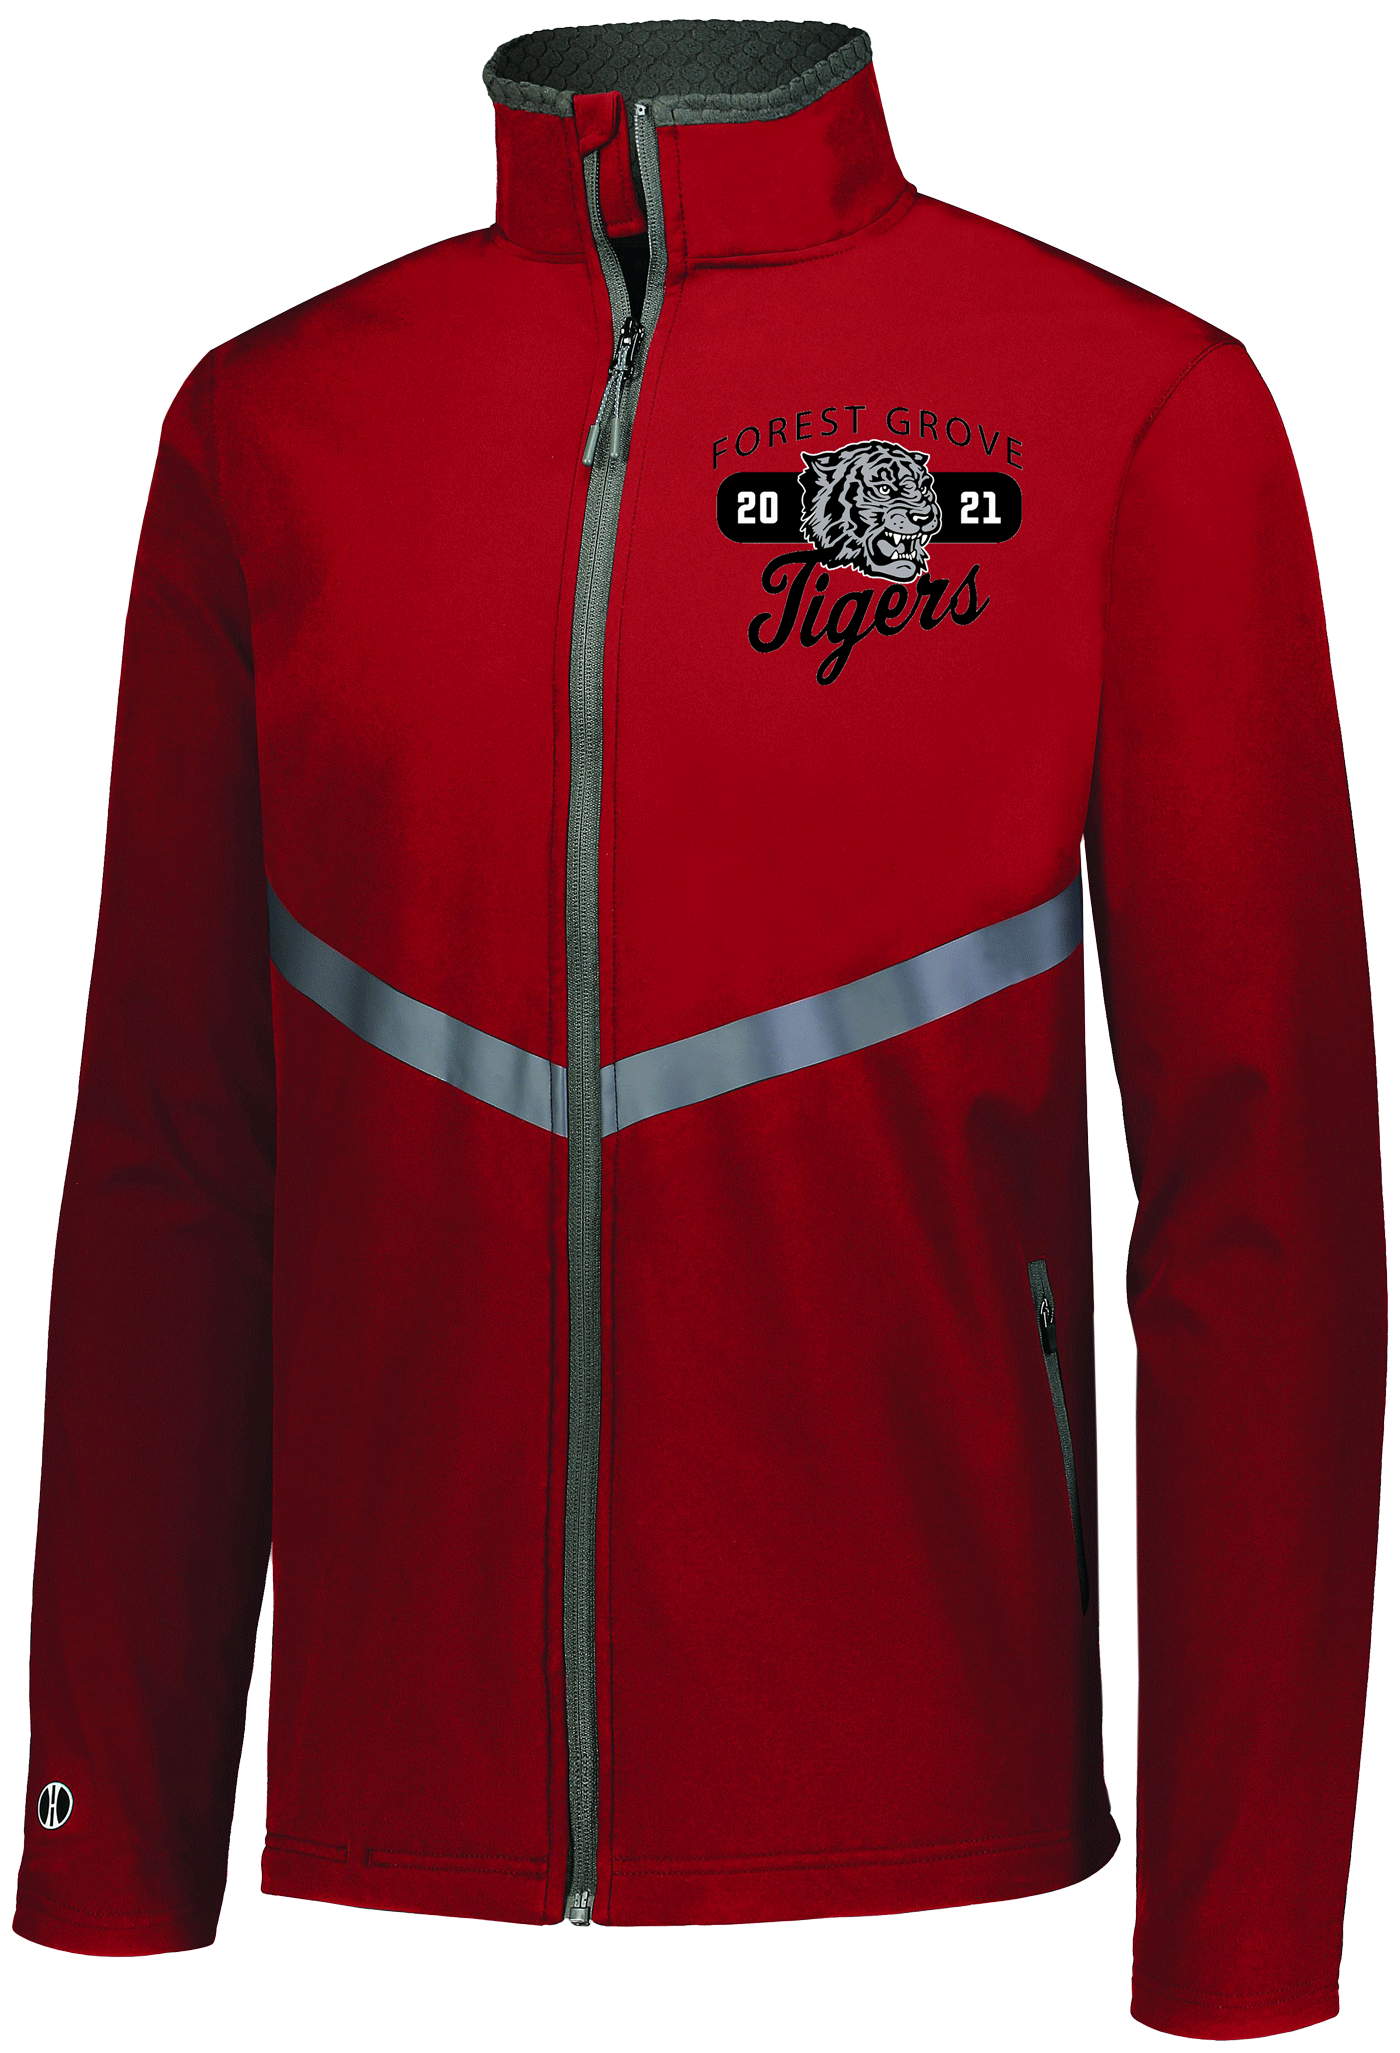 Red zip up jacket featuring Columbus OH custom embroidery